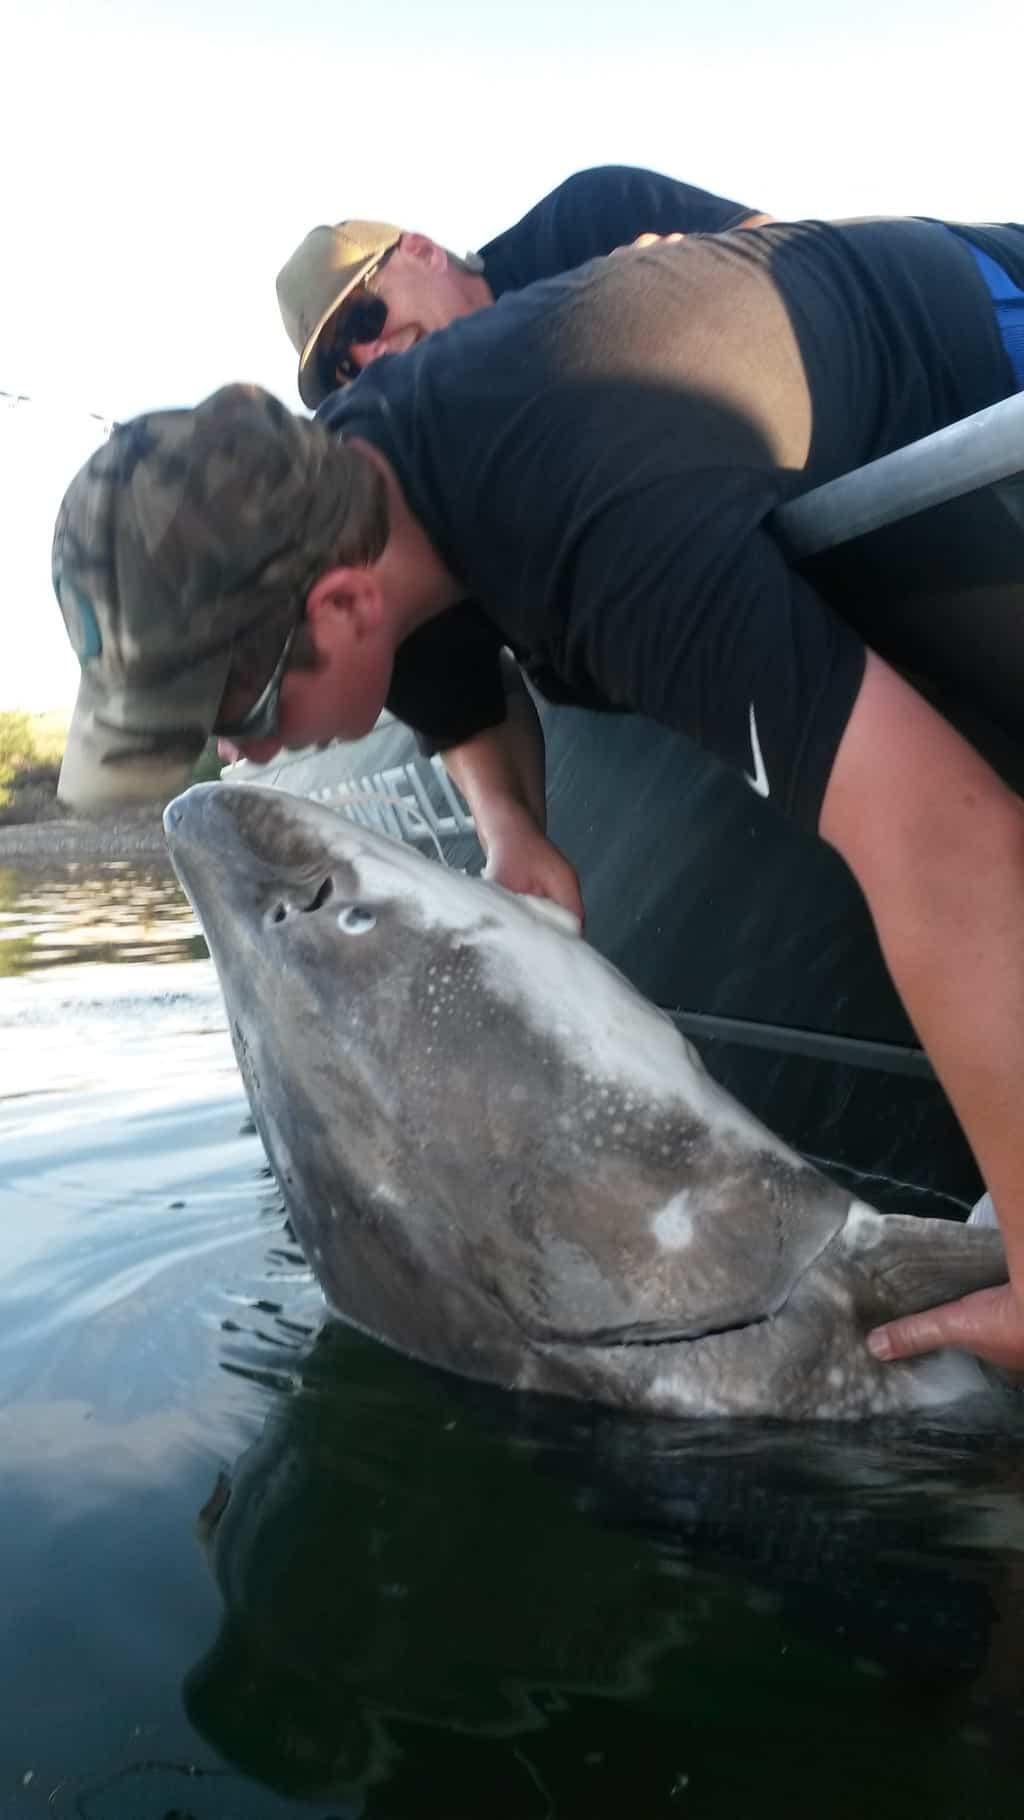 A giant sturgeon gets a kiss before being released back into the Columbia River near The Dalles.